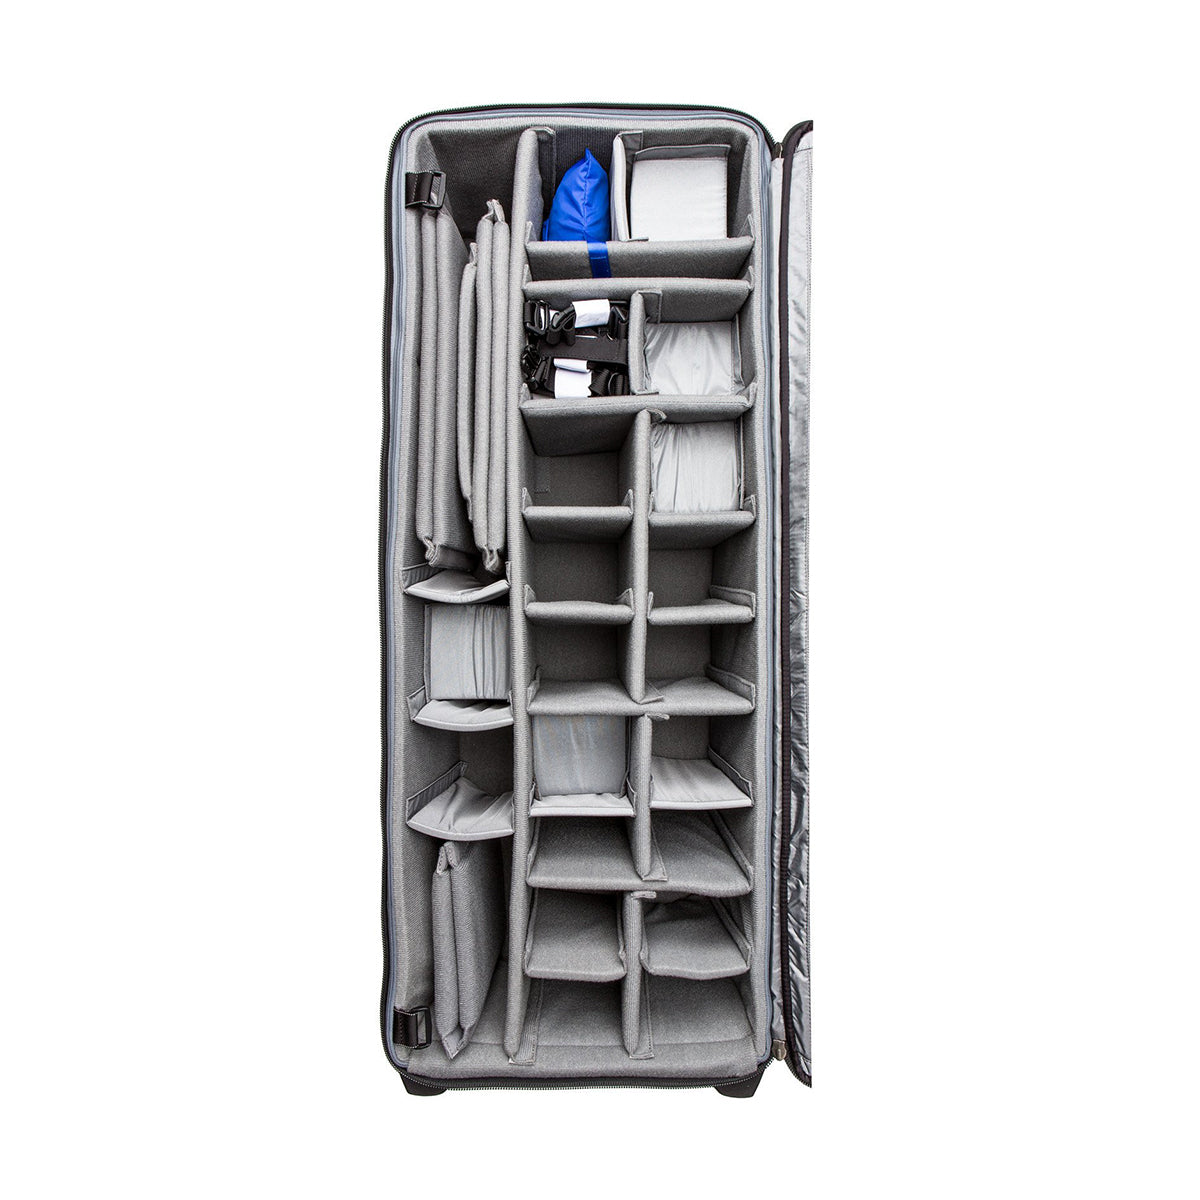 Think Tank Production Manager 40 Rolling Gear Case